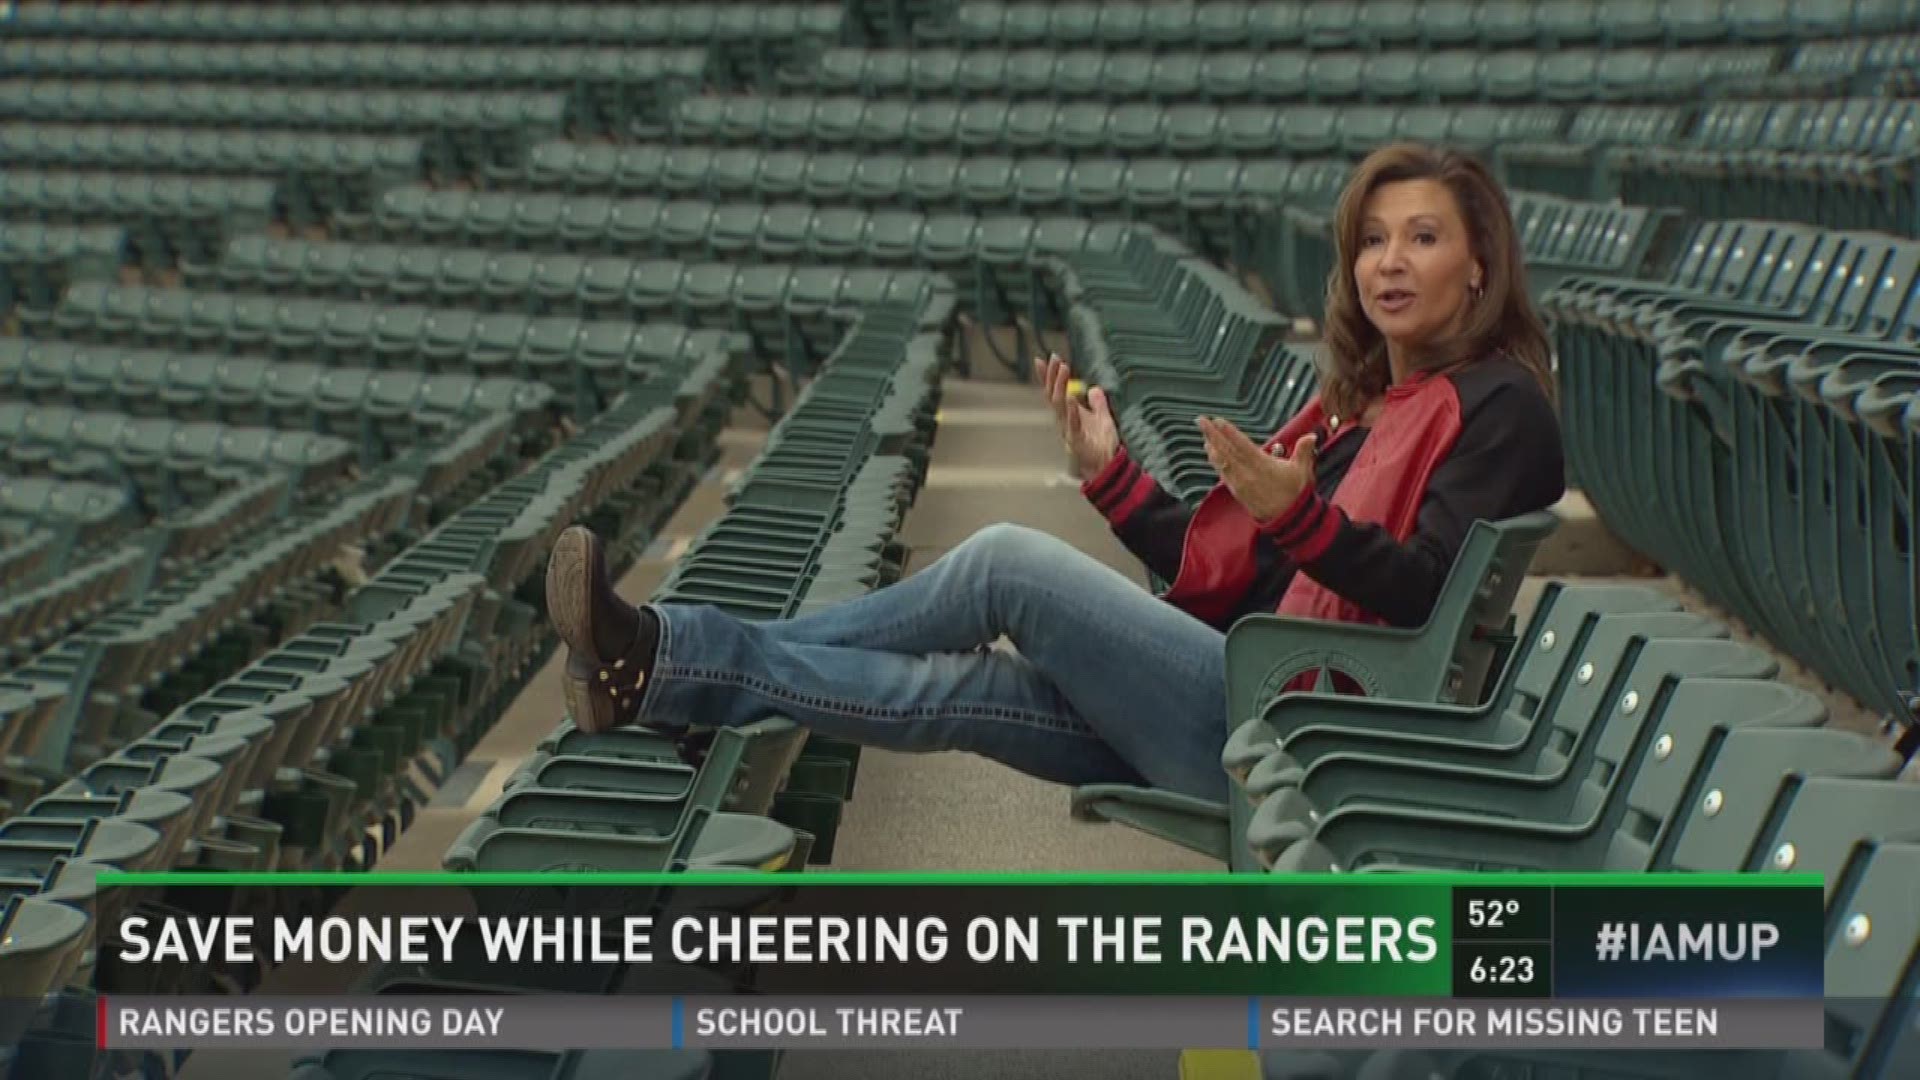 Save money while cheering on the Rangers